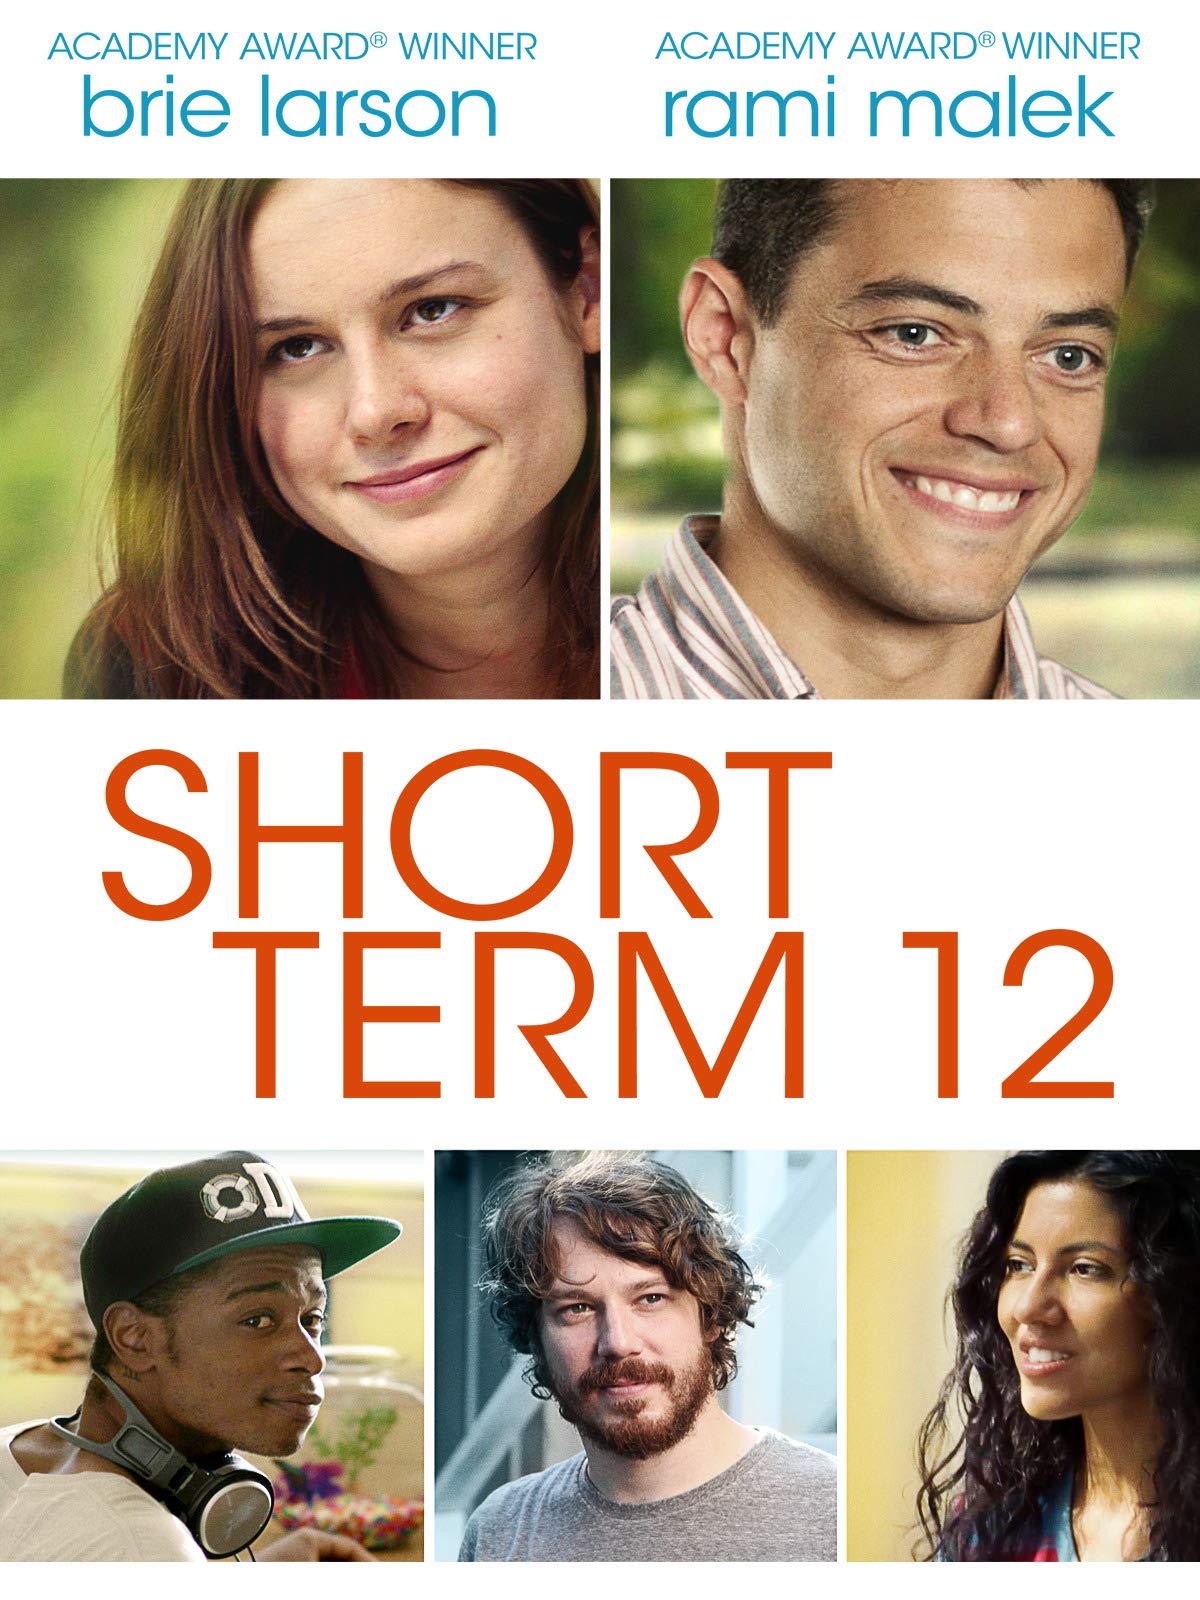 A movie about Short Term 12